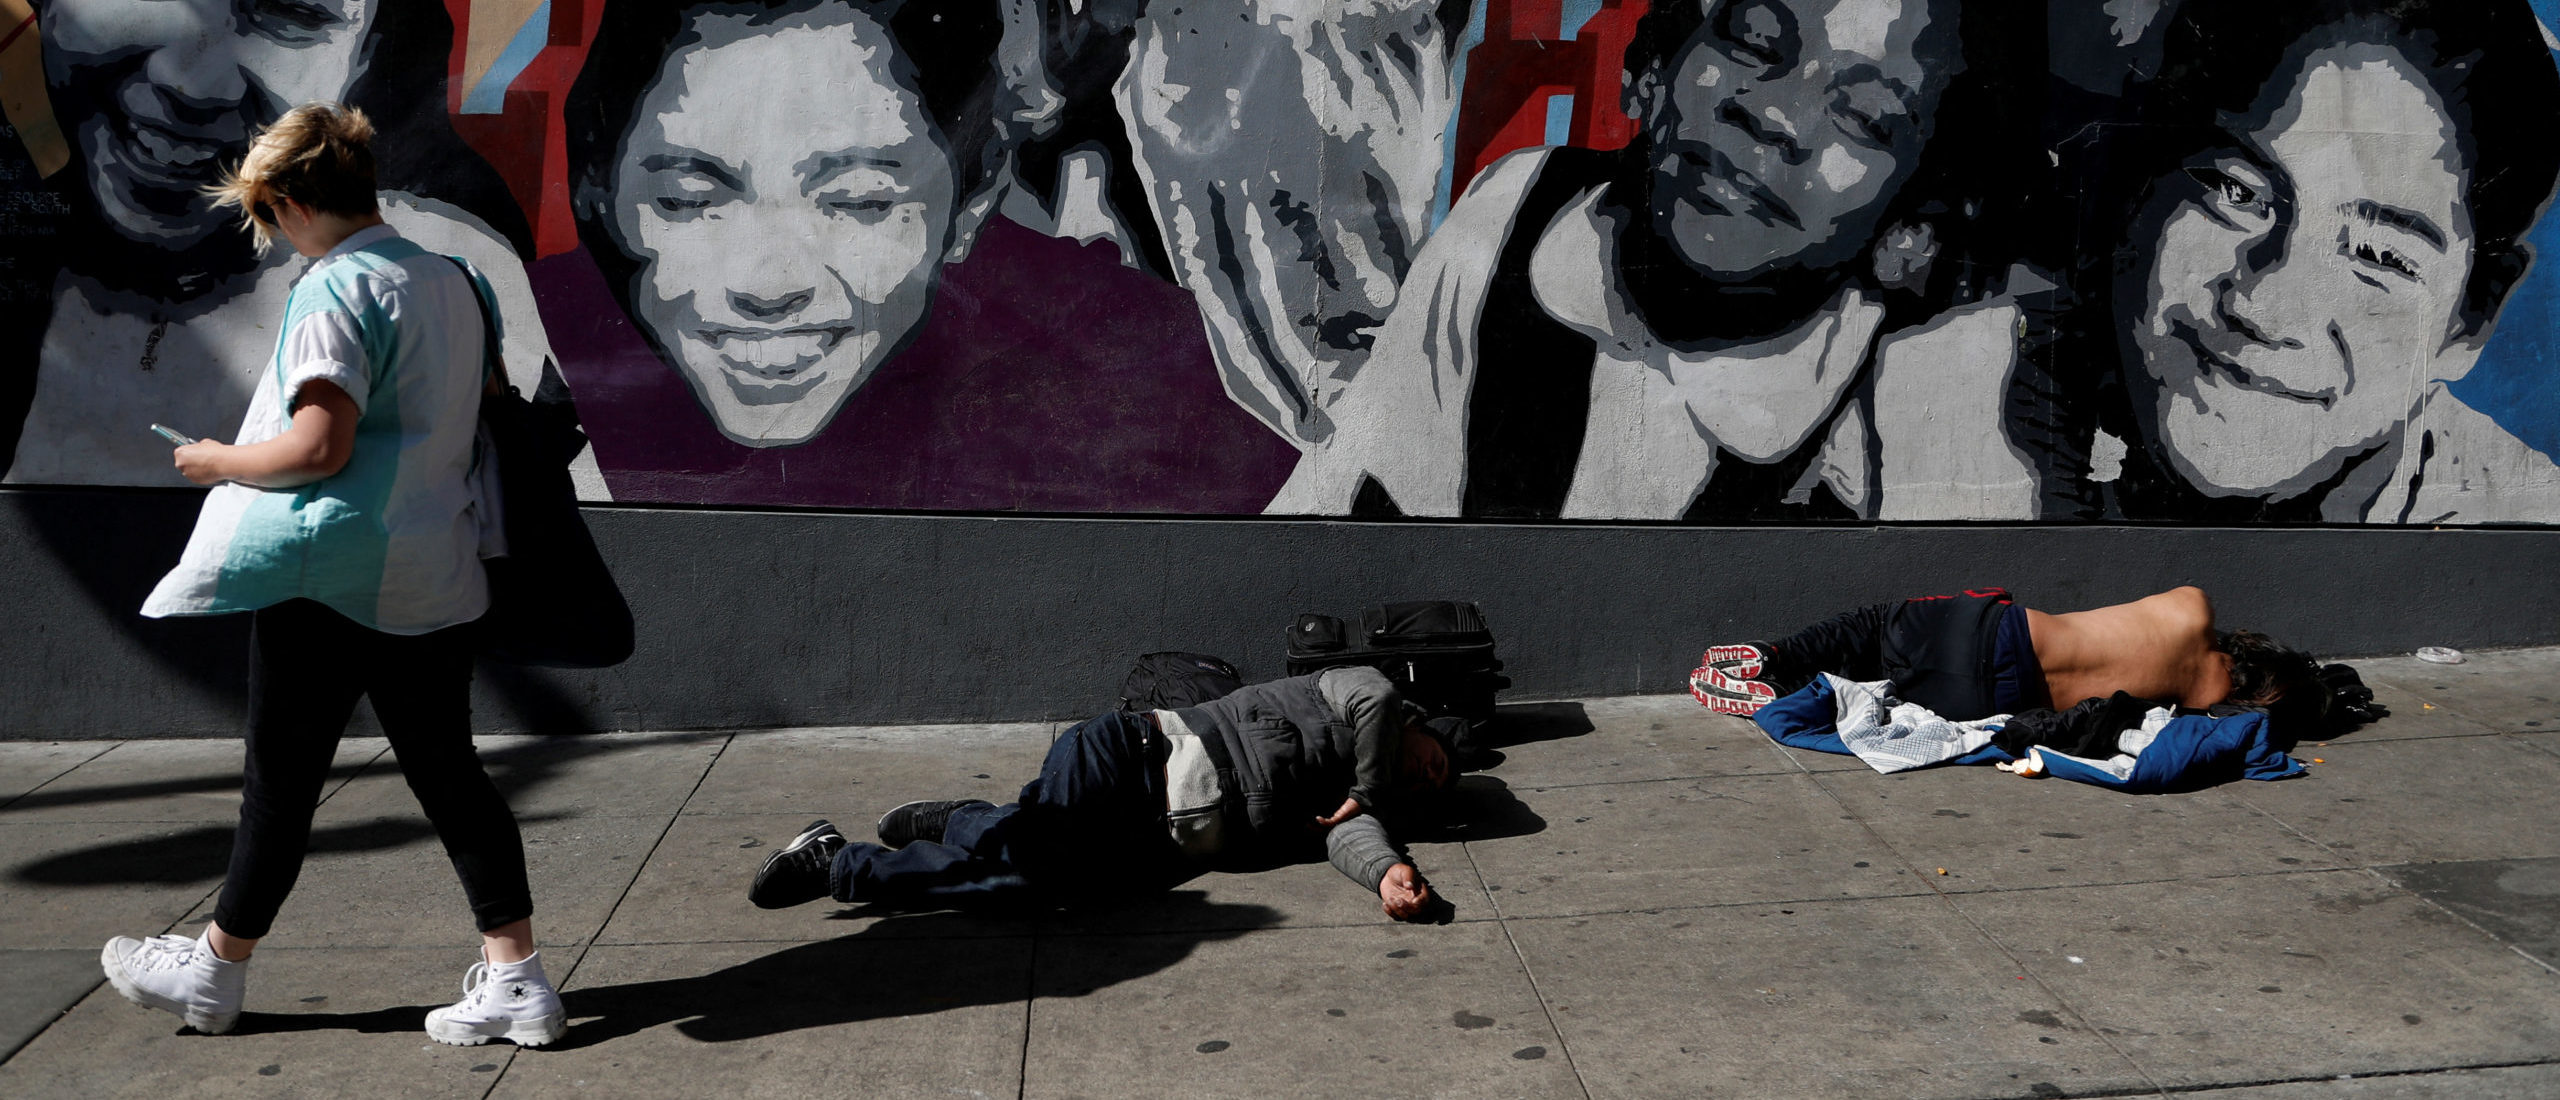 A woman walks past men passed out on the sidewalk n the Tenderloin area of San Francisco, California, U.S., February 28, 2020. Picture taken February 28, 2020. REUTERS/Shannon Stapleton/File Photo